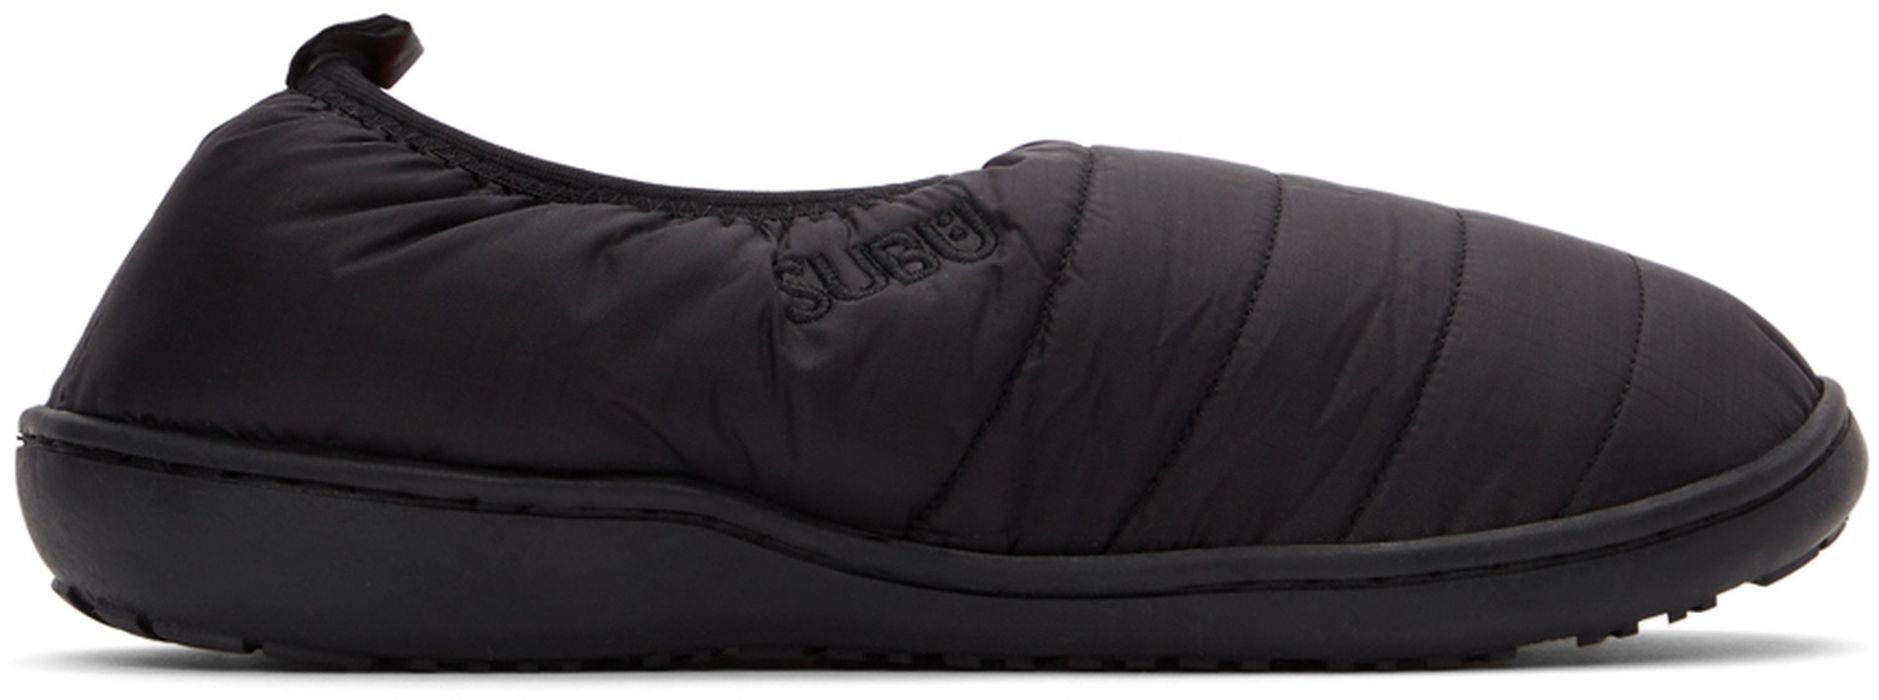 SUBU Black Quilted Packable Slippers